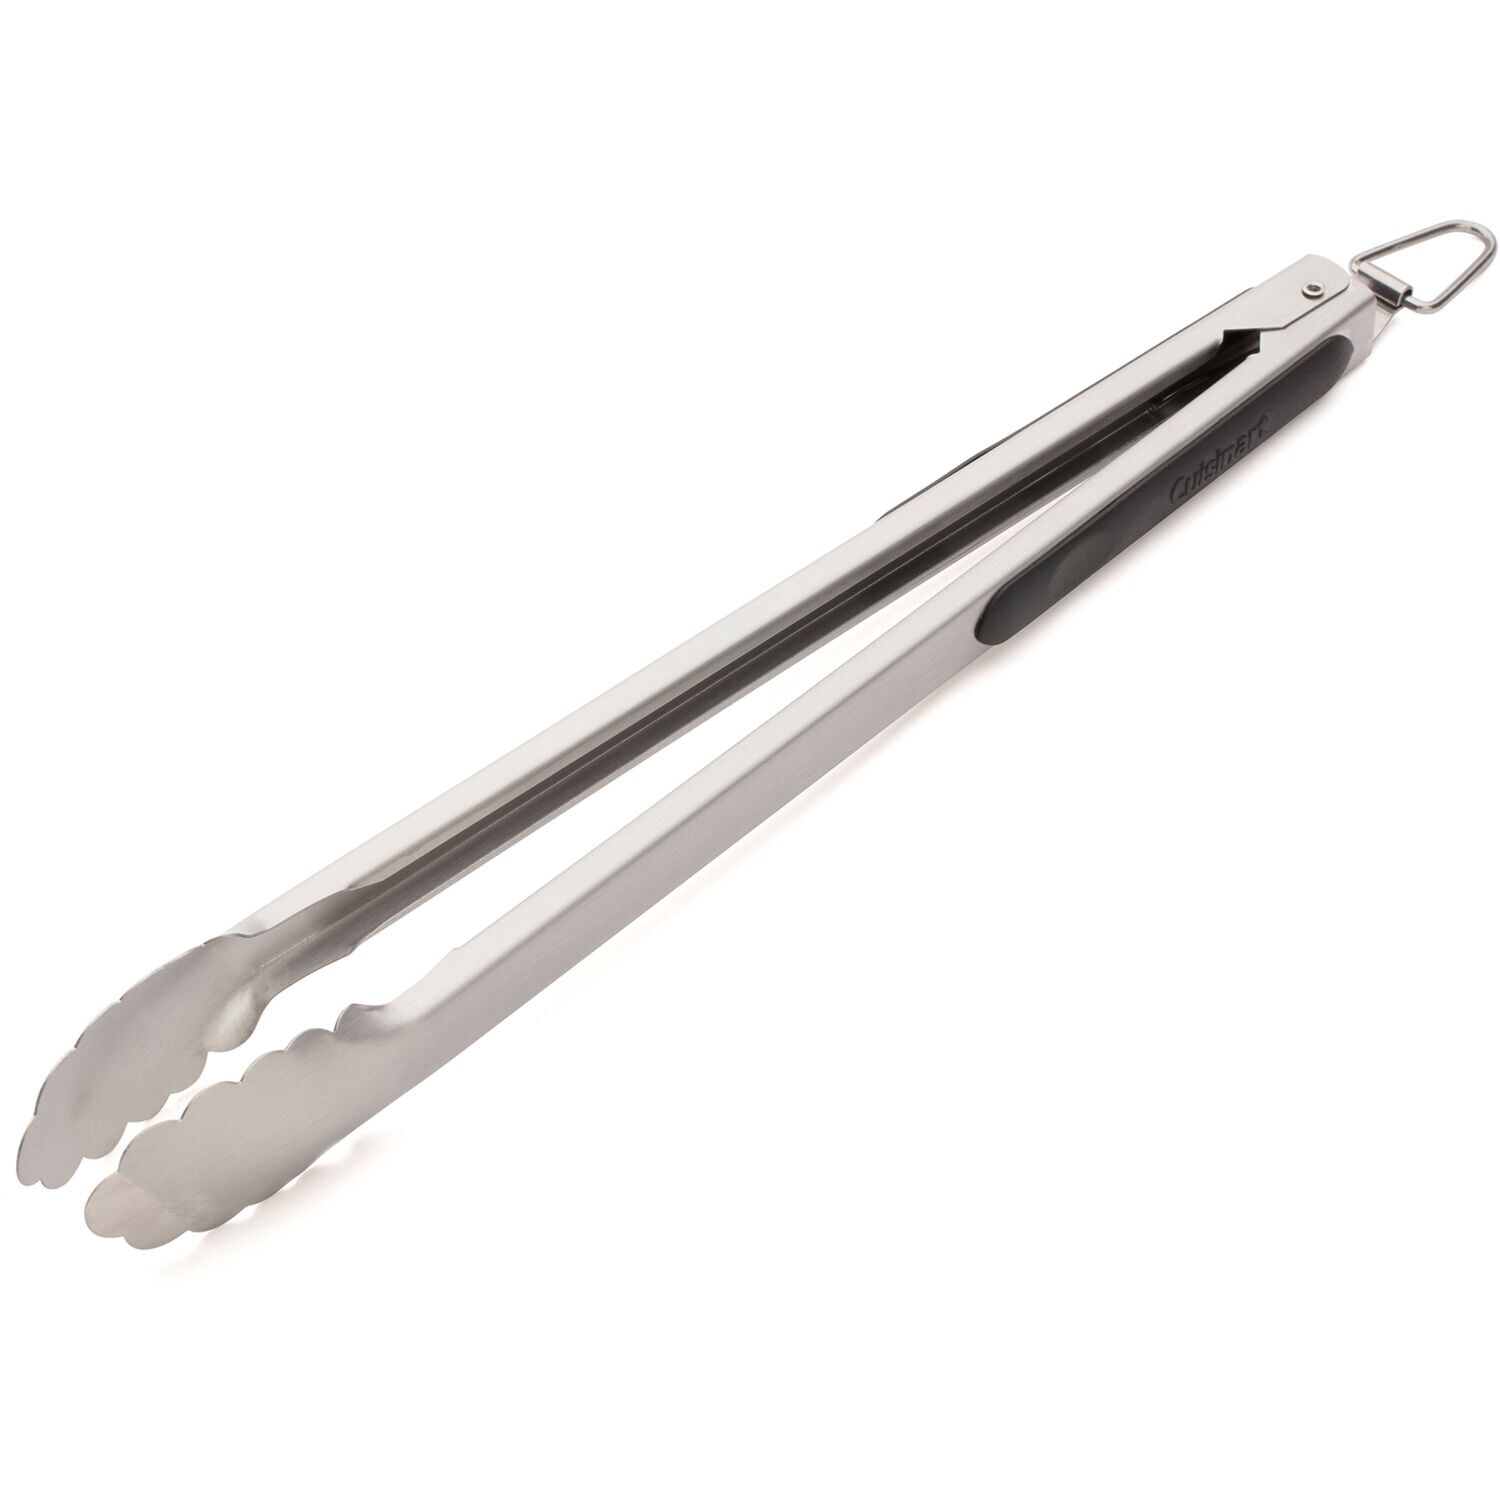 Cuisinart Non-Handled 9 Silicone Tongs